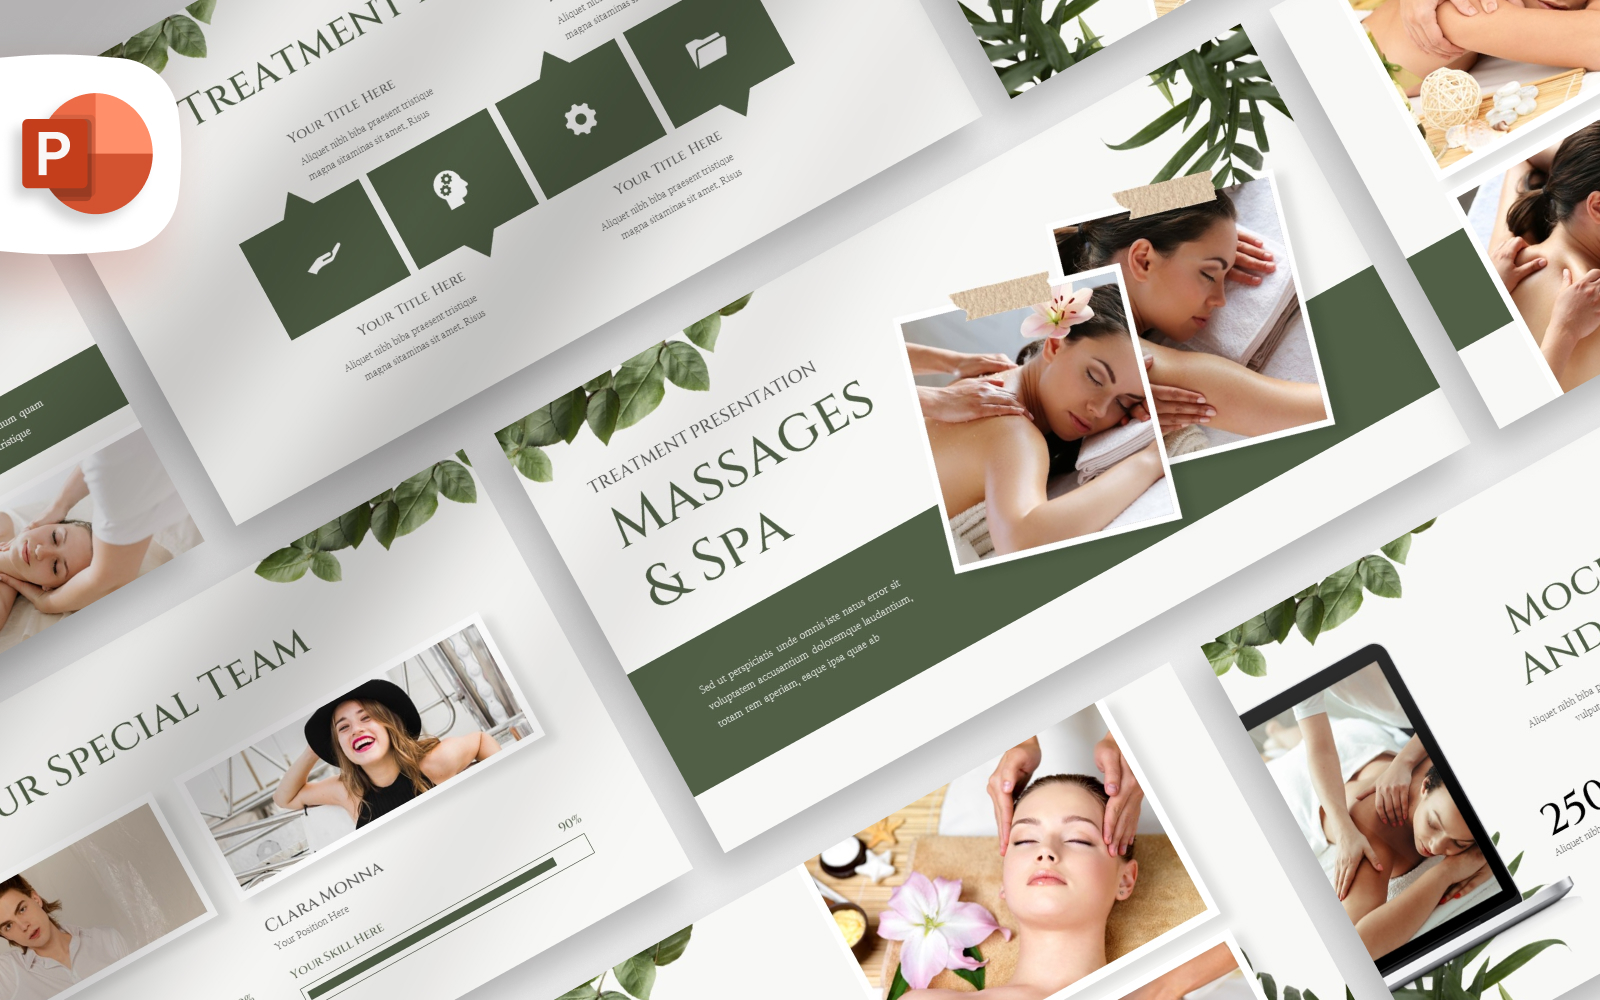 Massages and Spa Center PowerPoint Template